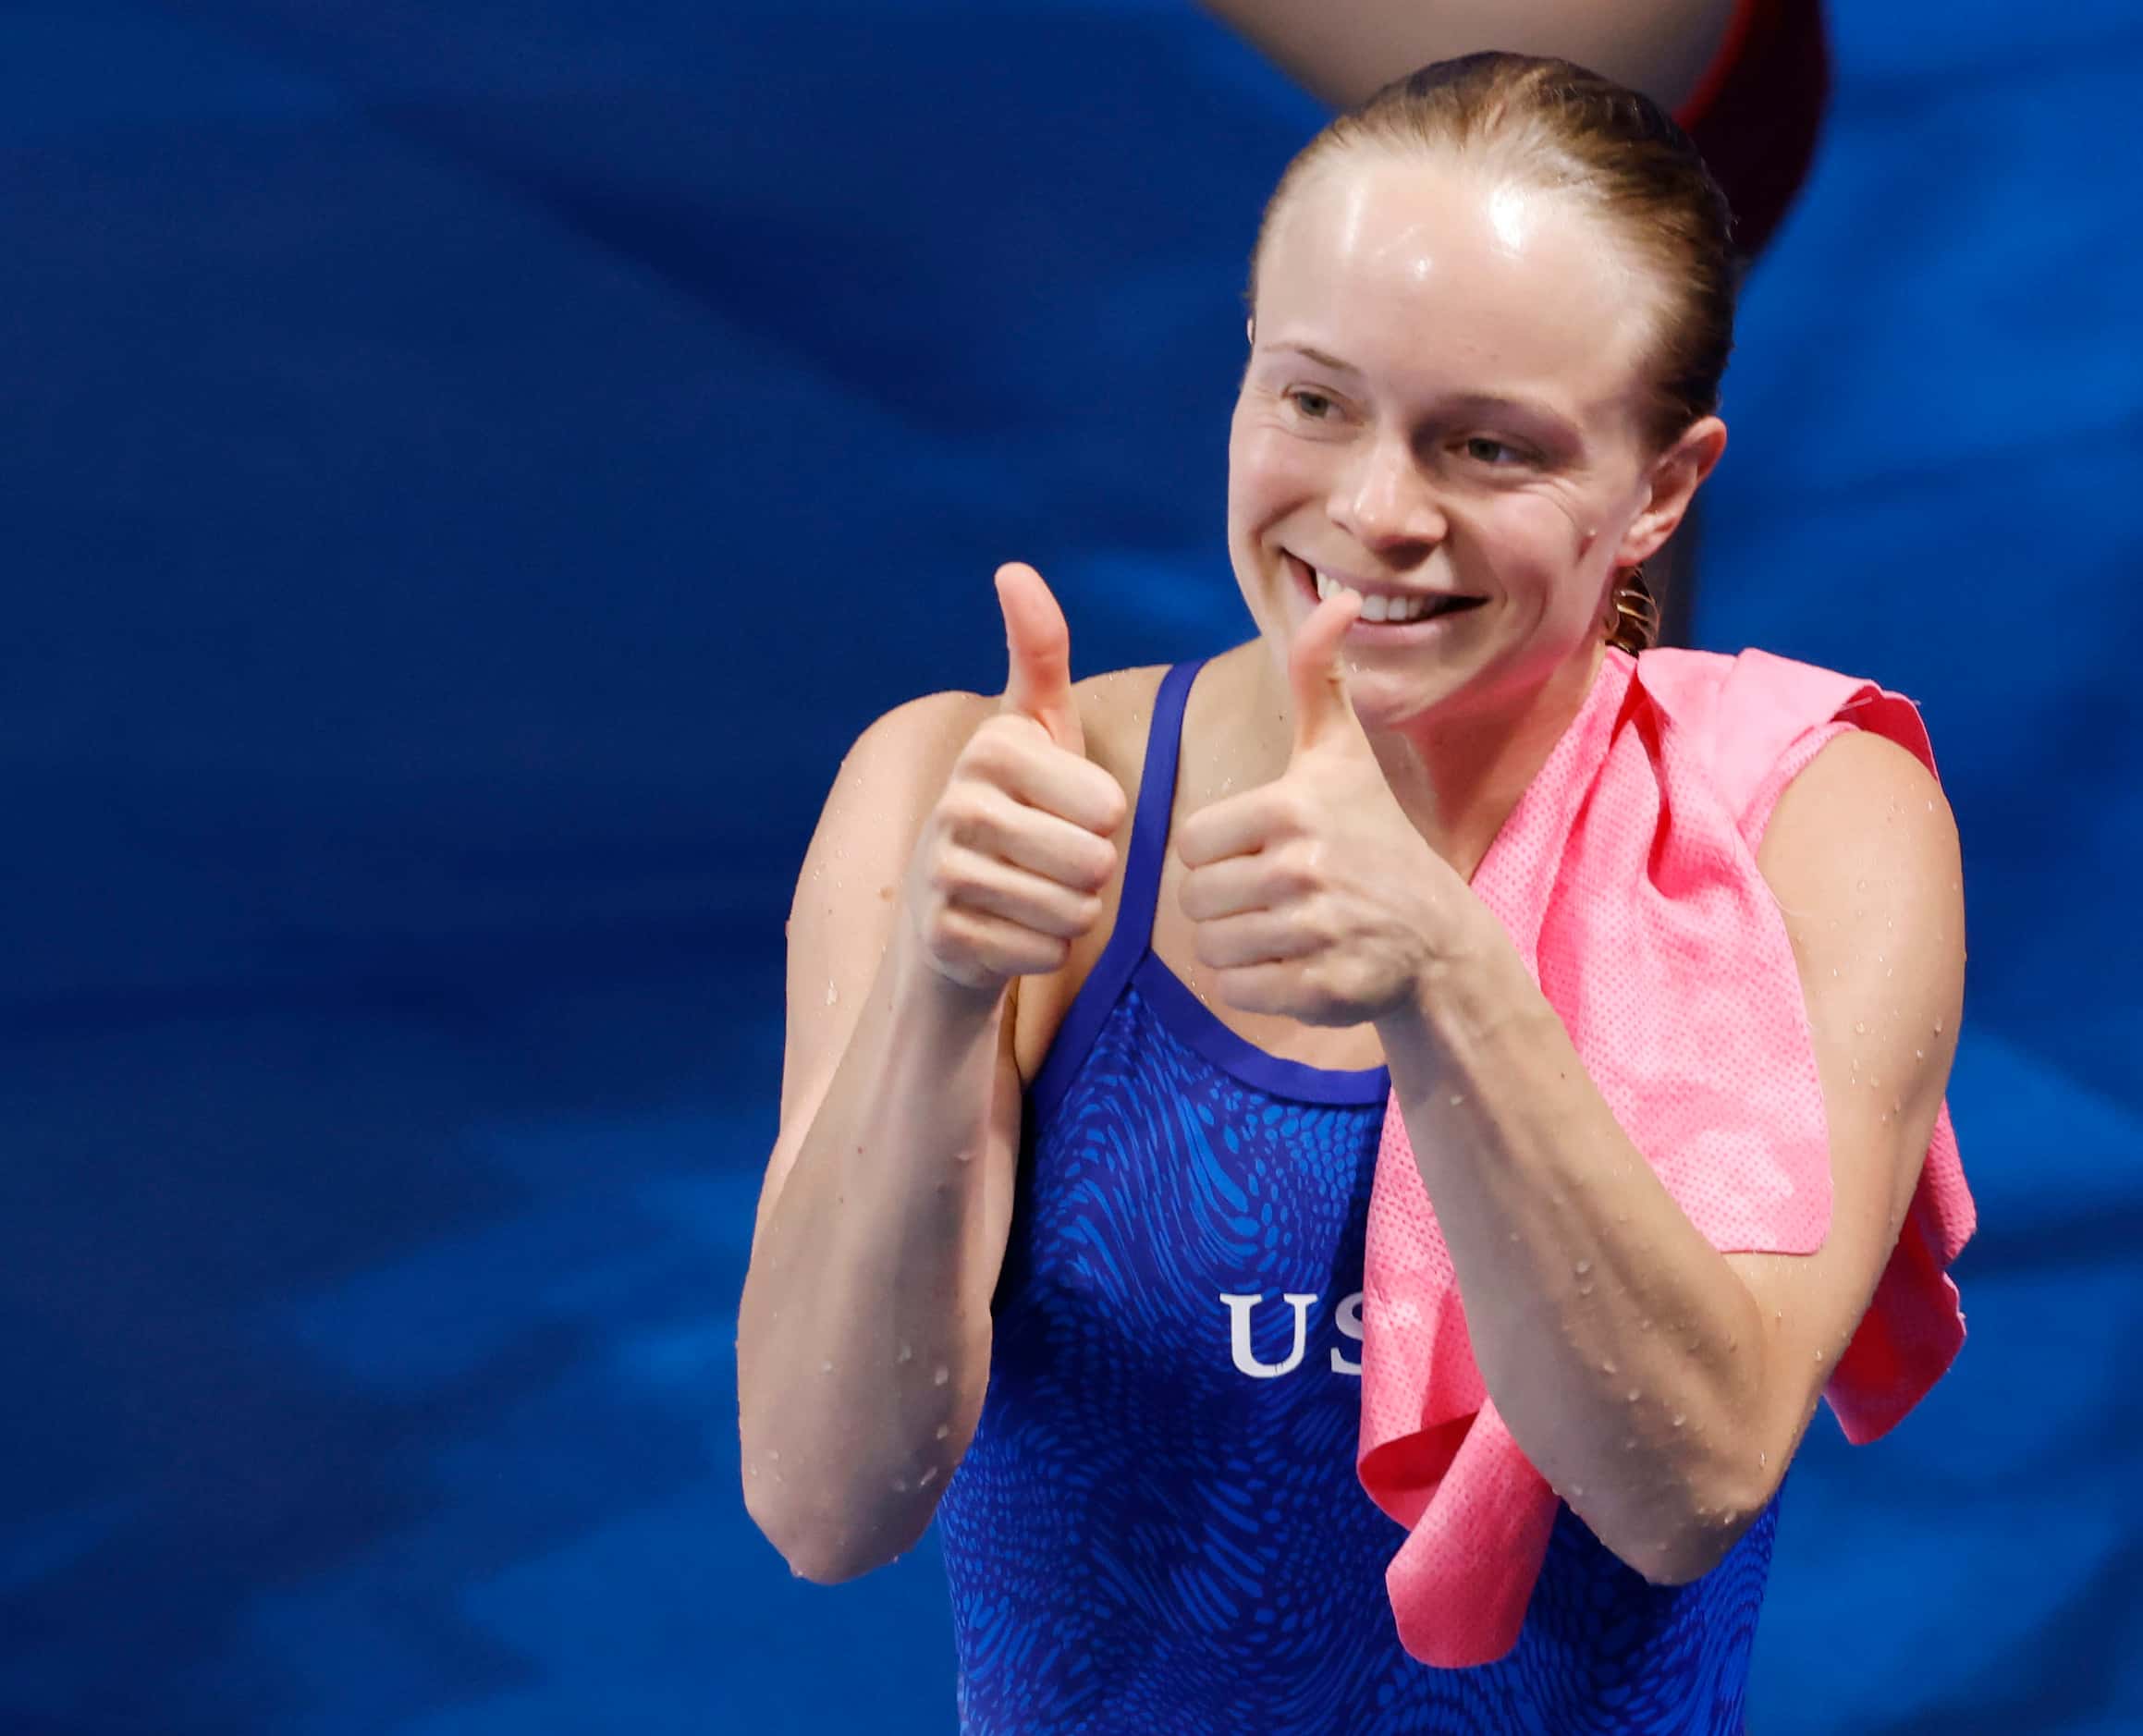 USA’s Krysta Palmer is all smiles after completing her last dive in the women’s 3 meter...